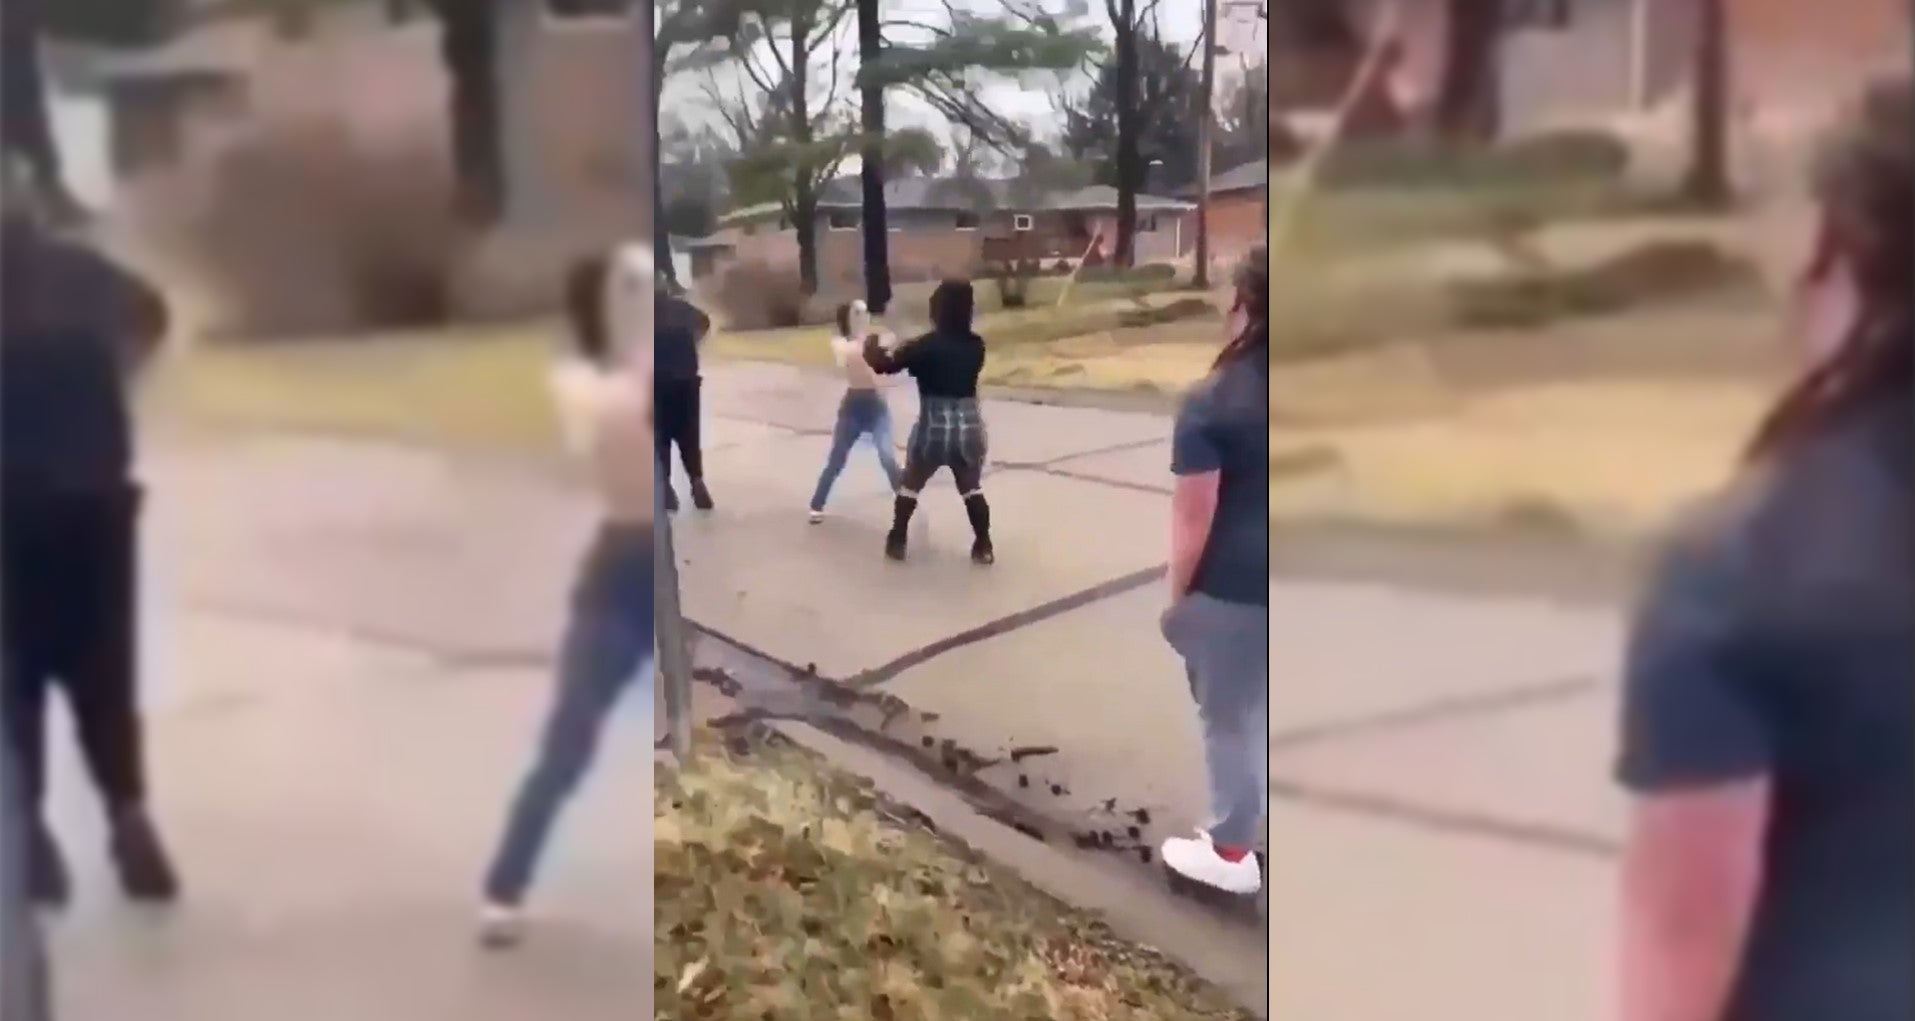 A viral video showed the moment a fight near a school in St Louis left a teenage girl with critical injuries